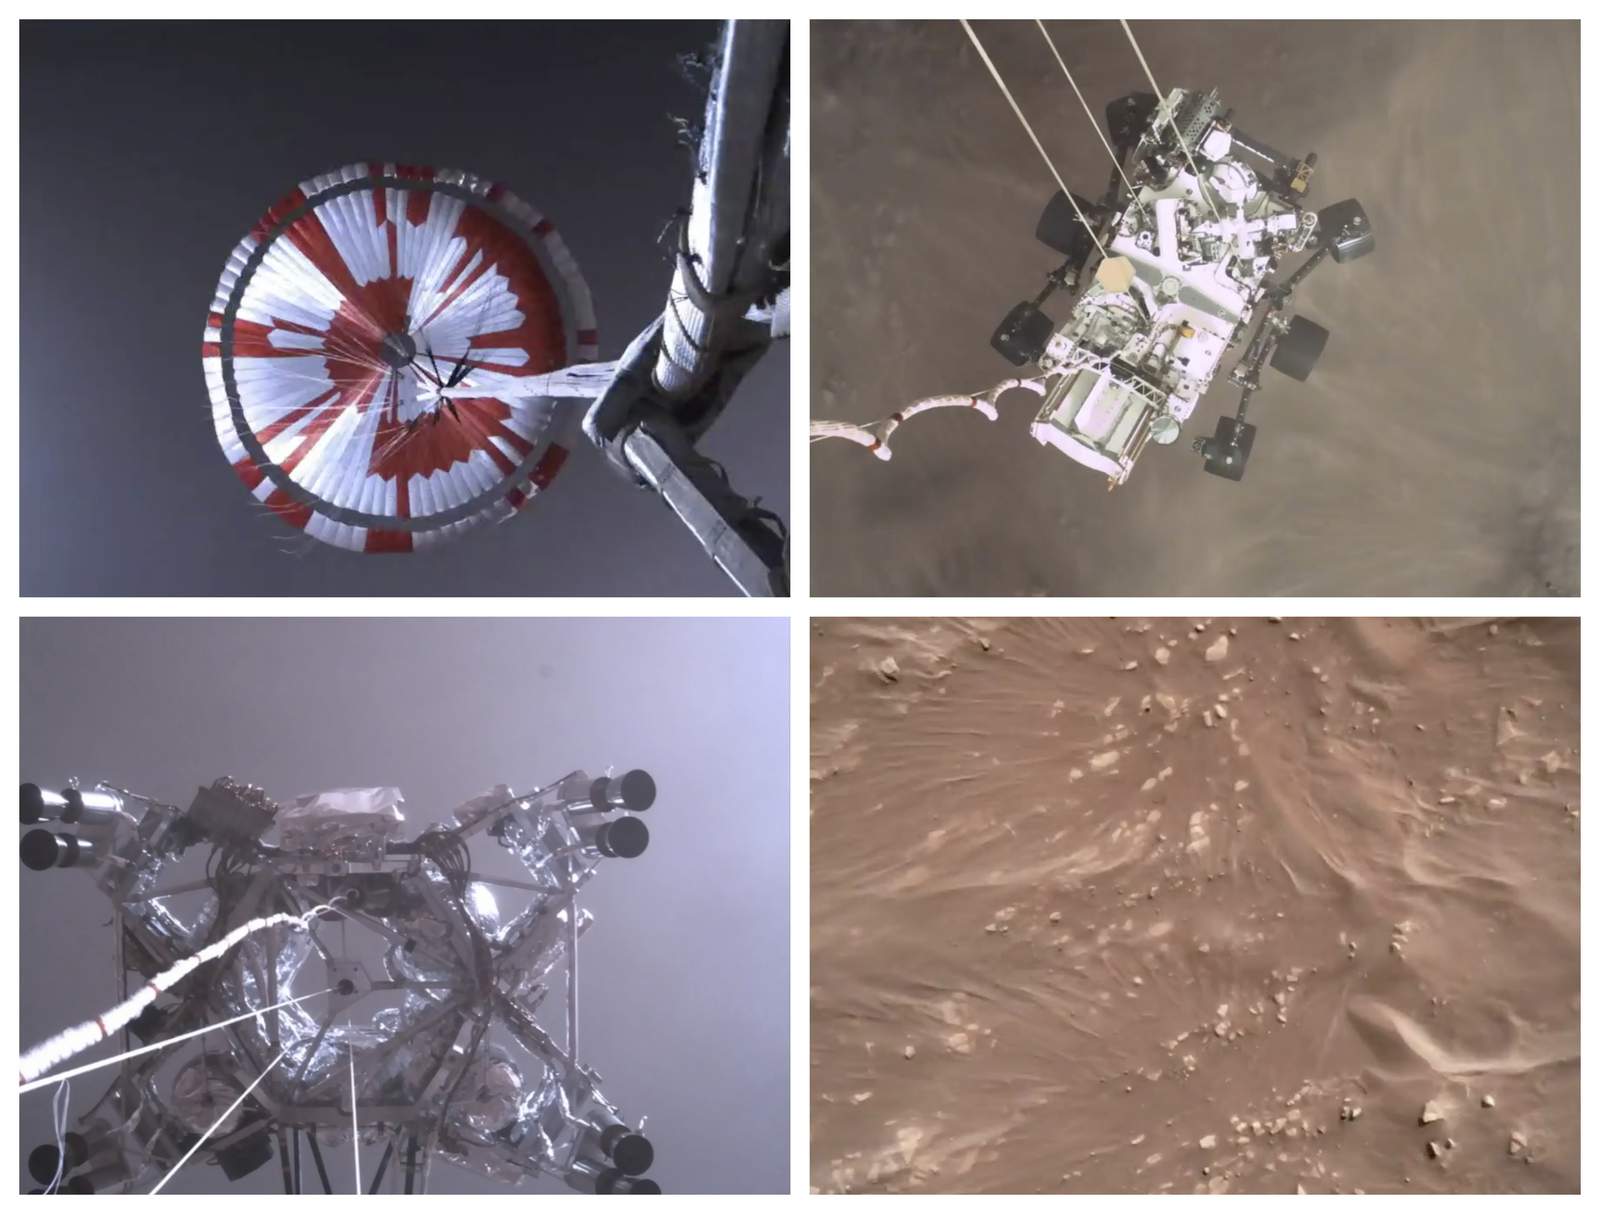 NASA releases Mars landing video: ‘Stuff of our dreams’